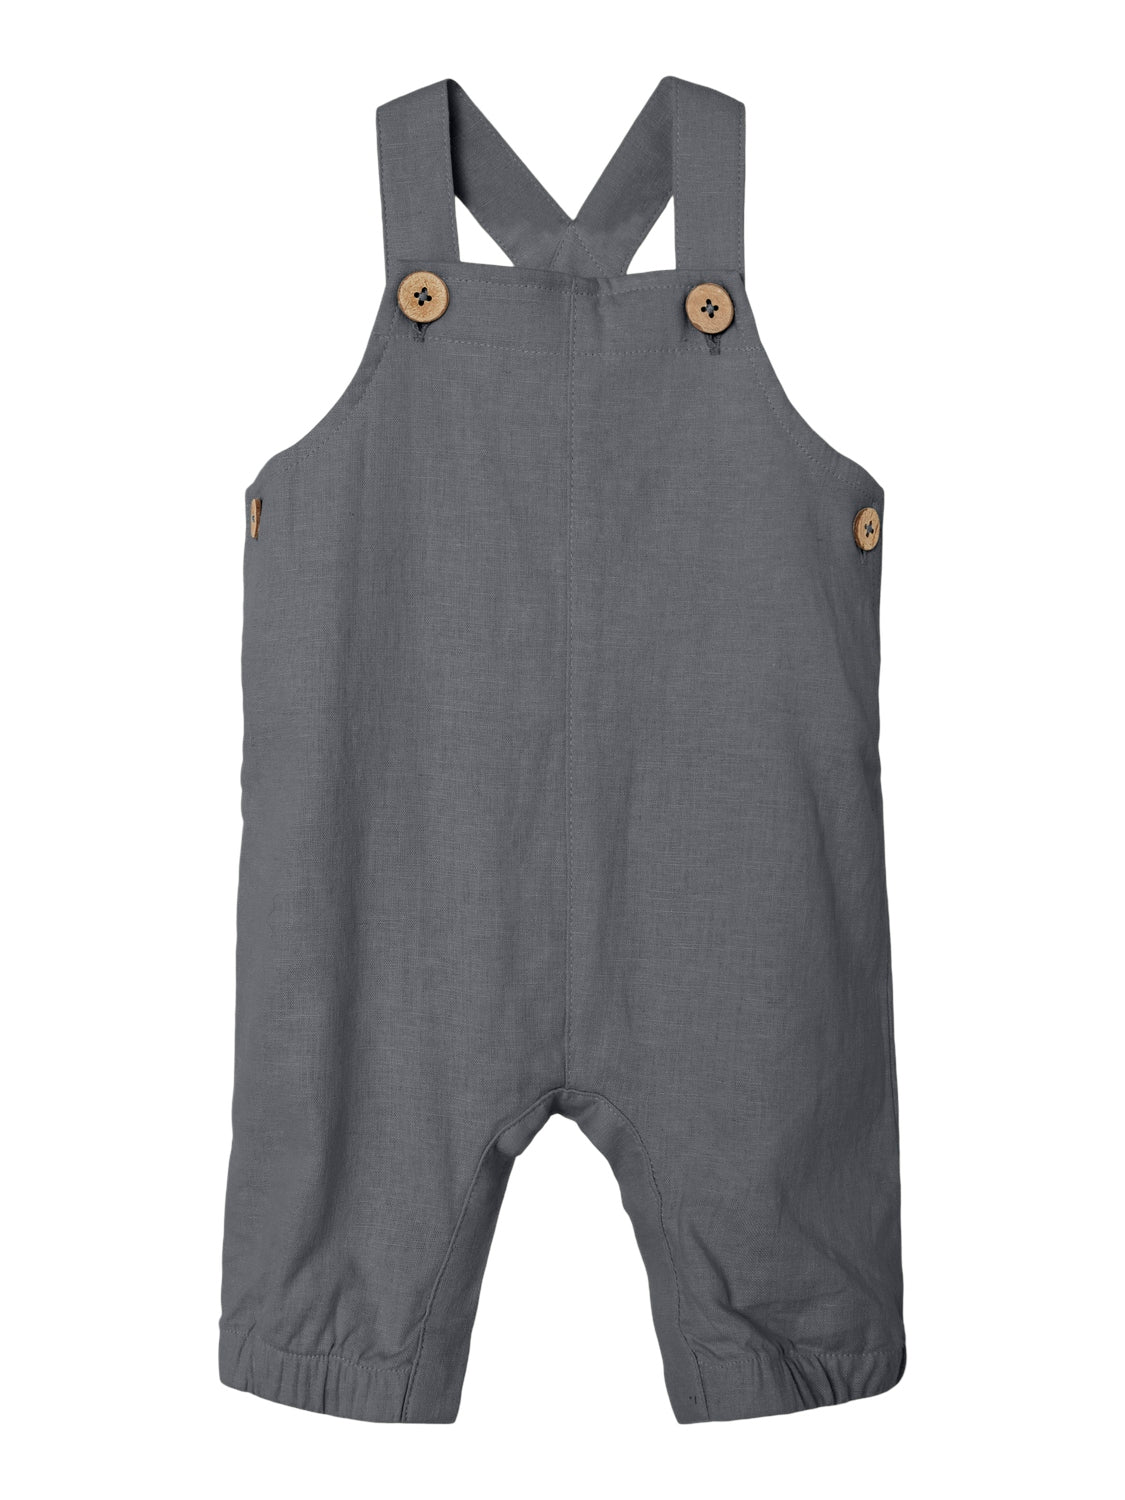 Lil Atelier Felix Overall - Quiet Shade